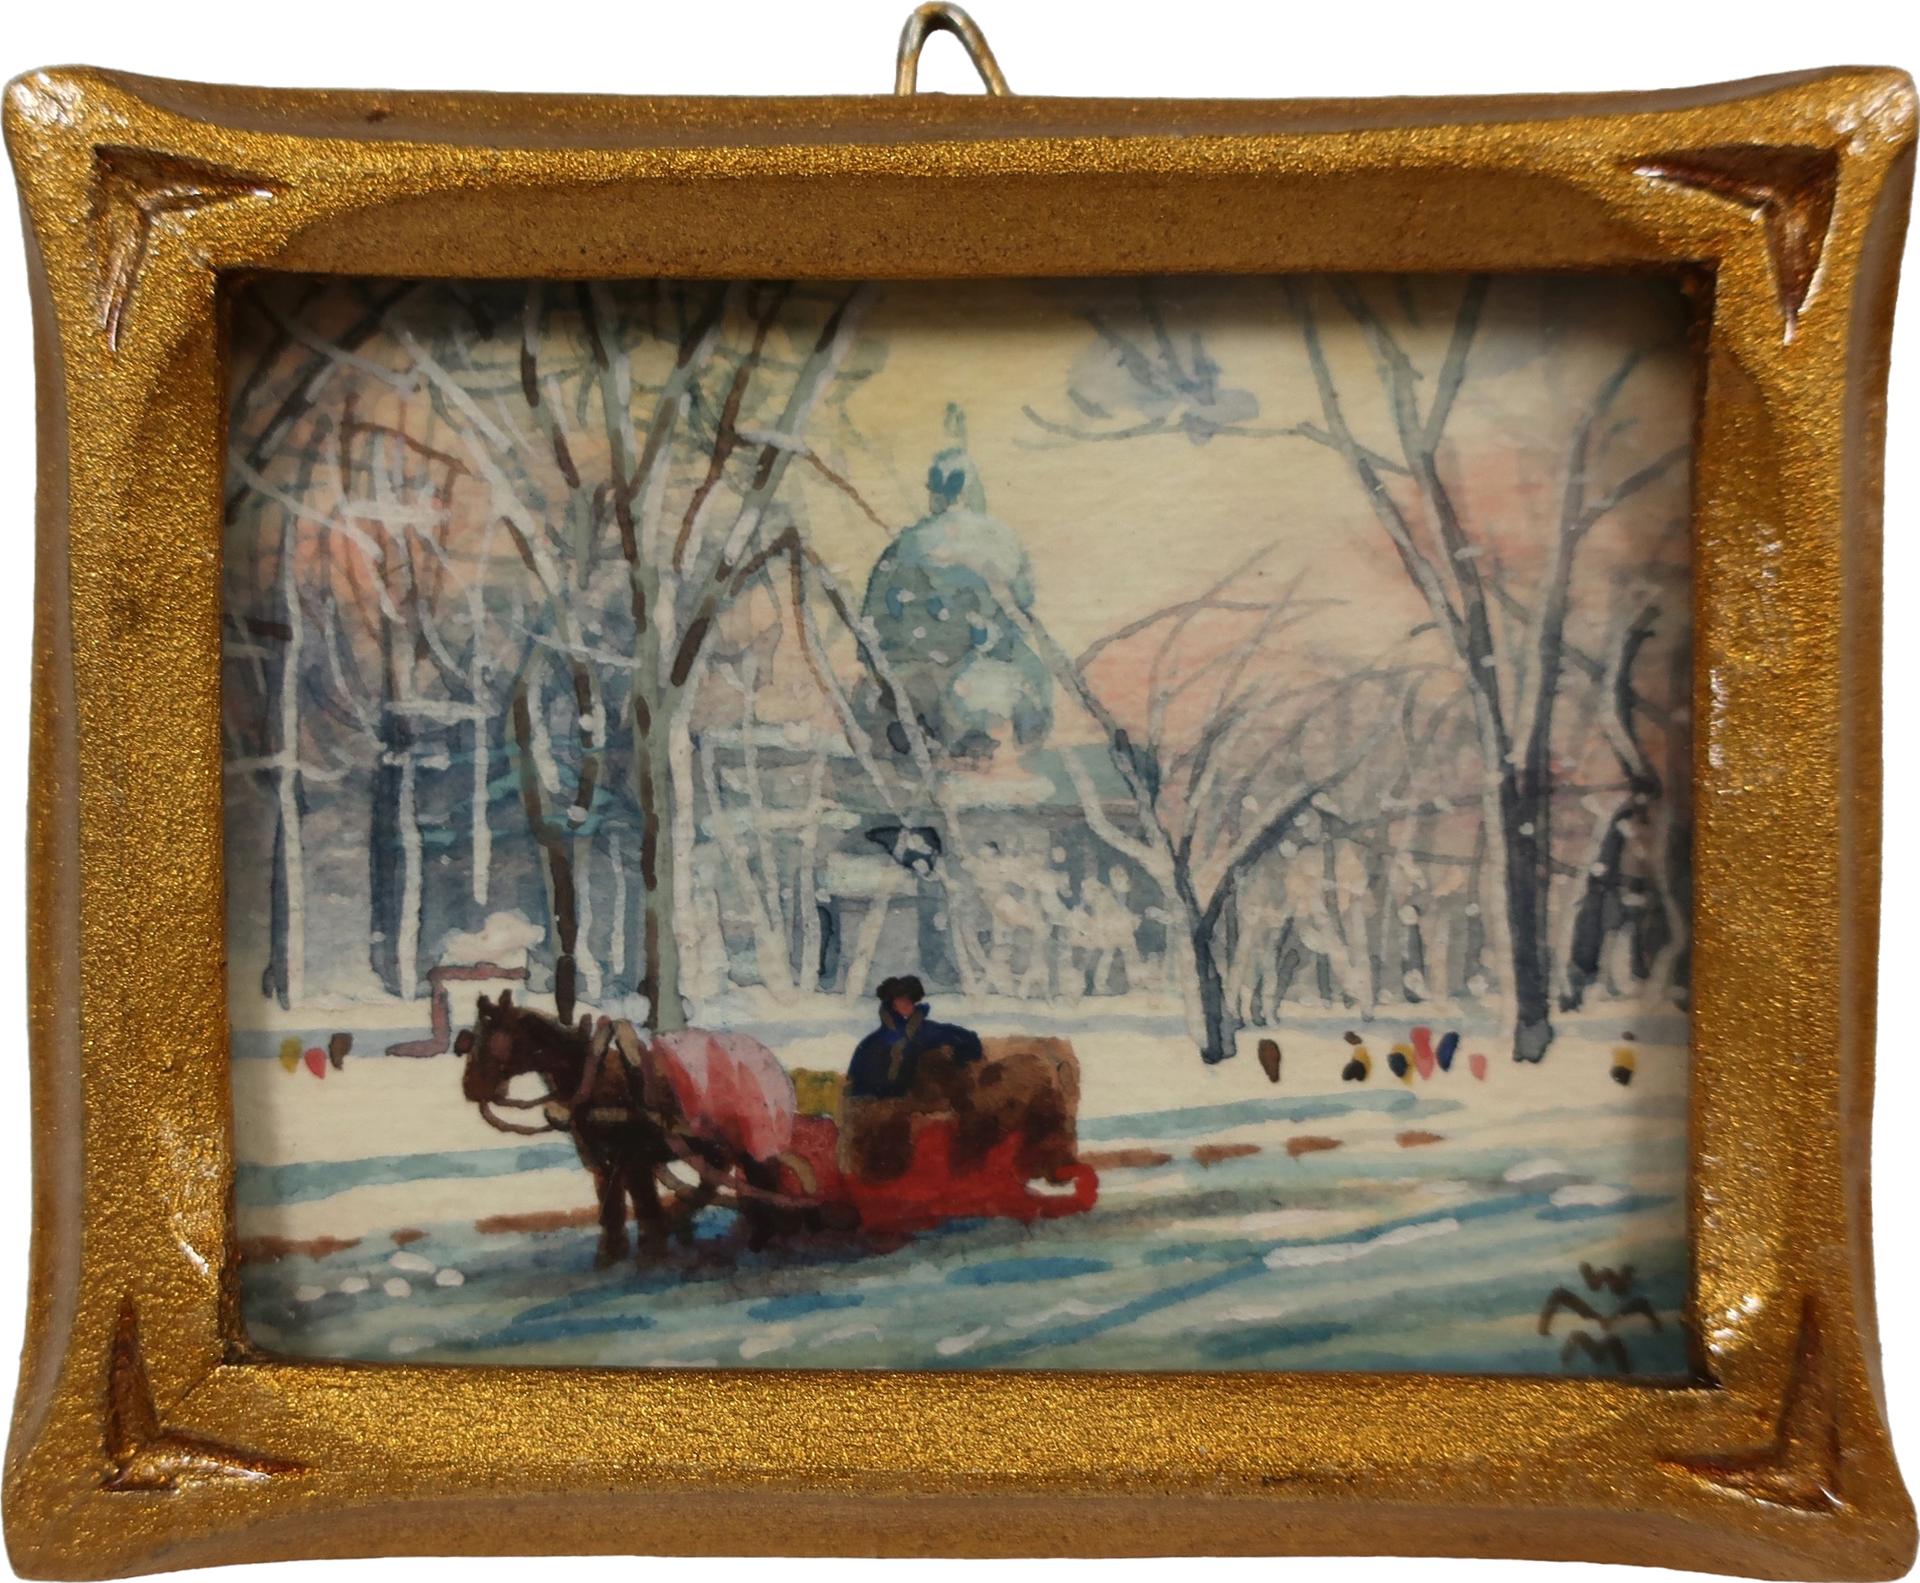 Willard Morse Mitchell (1879-1955) - The Little Red Sleigh (Dominion Square, Montreal)